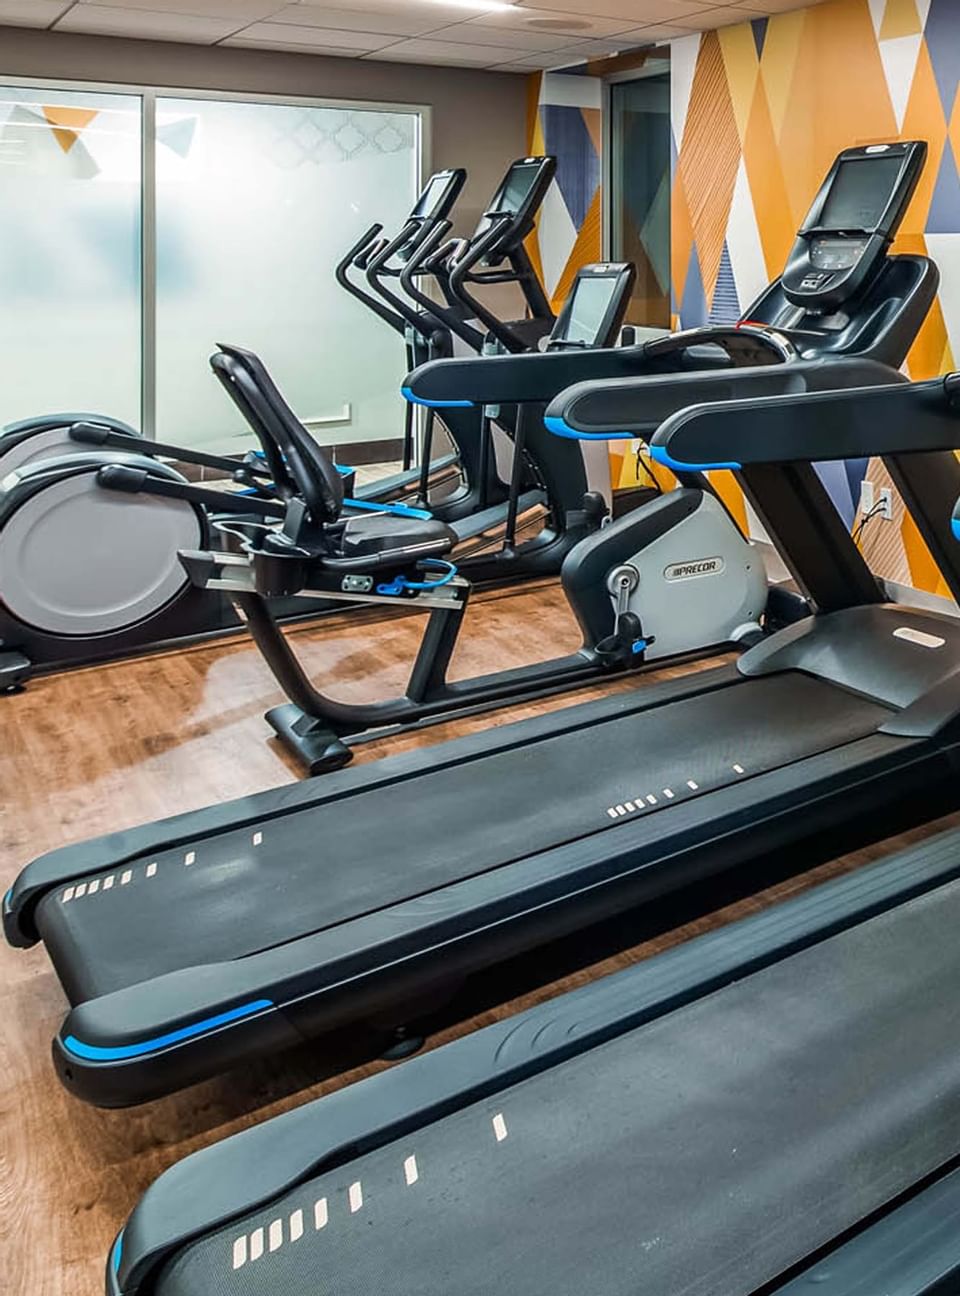 Fitness equipment in the gymnasium at the Kingsley Hotel